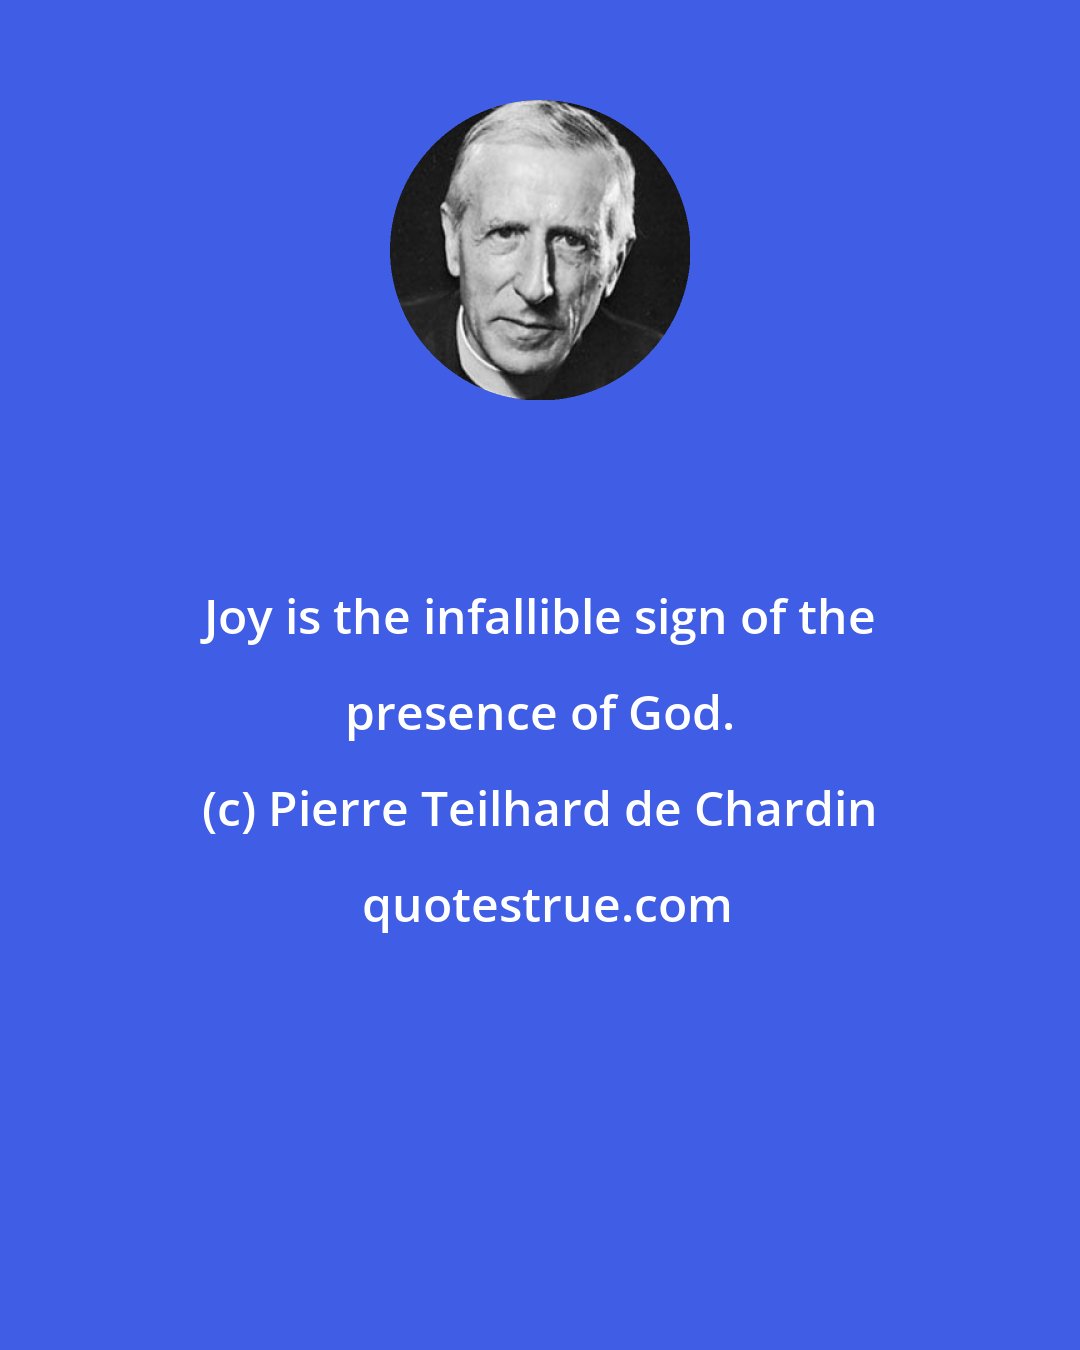 Pierre Teilhard de Chardin: Joy is the infallible sign of the presence of God.